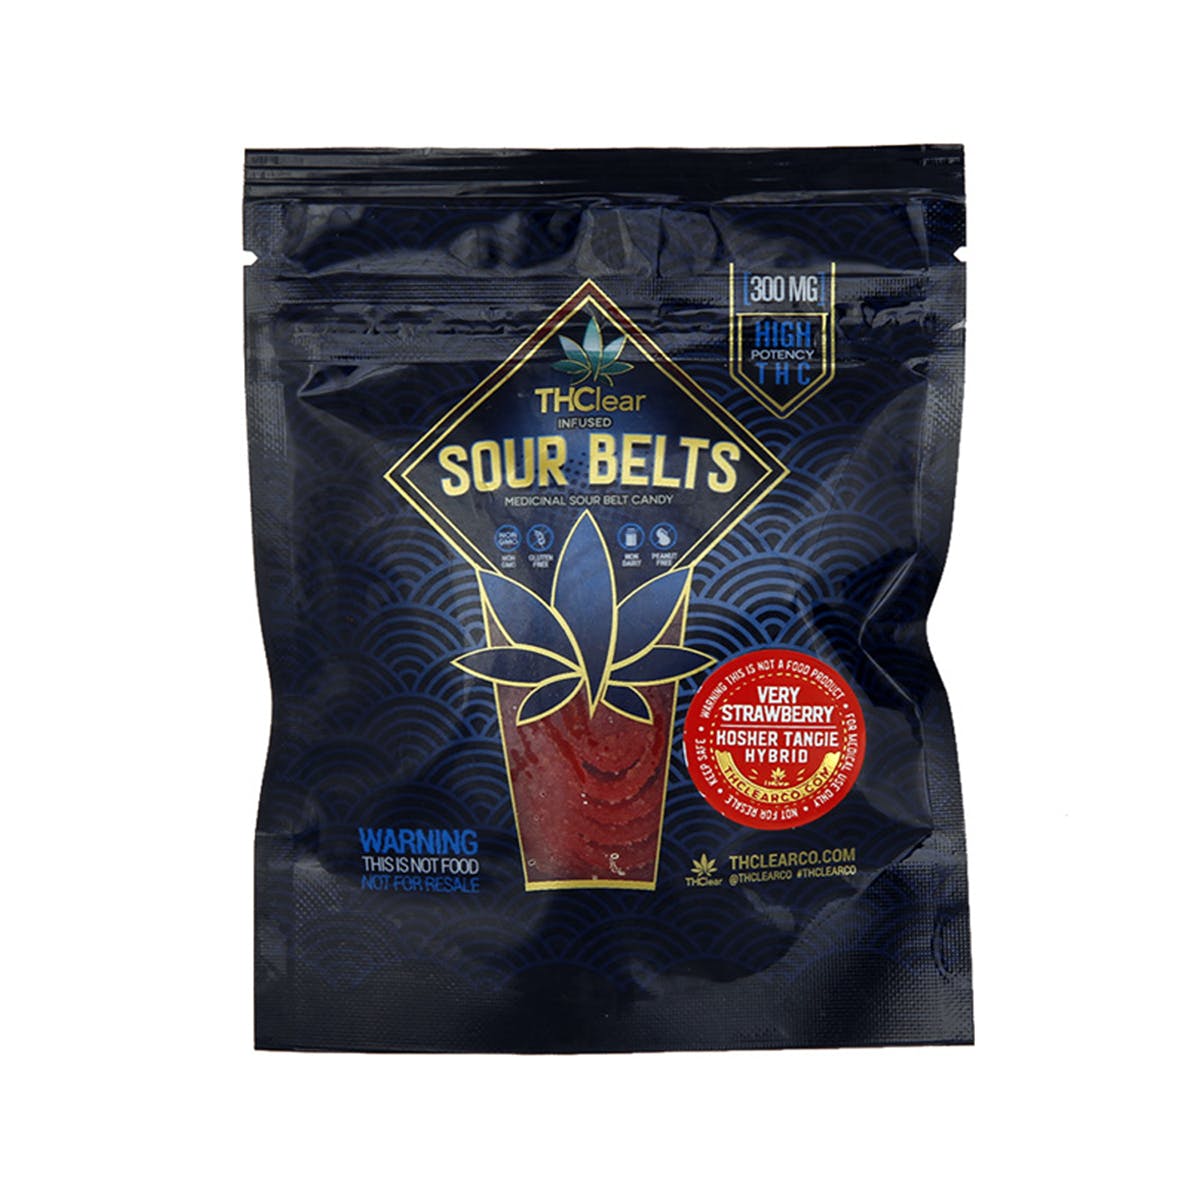 STRAWBERRY SOUR BELTS - 300MG